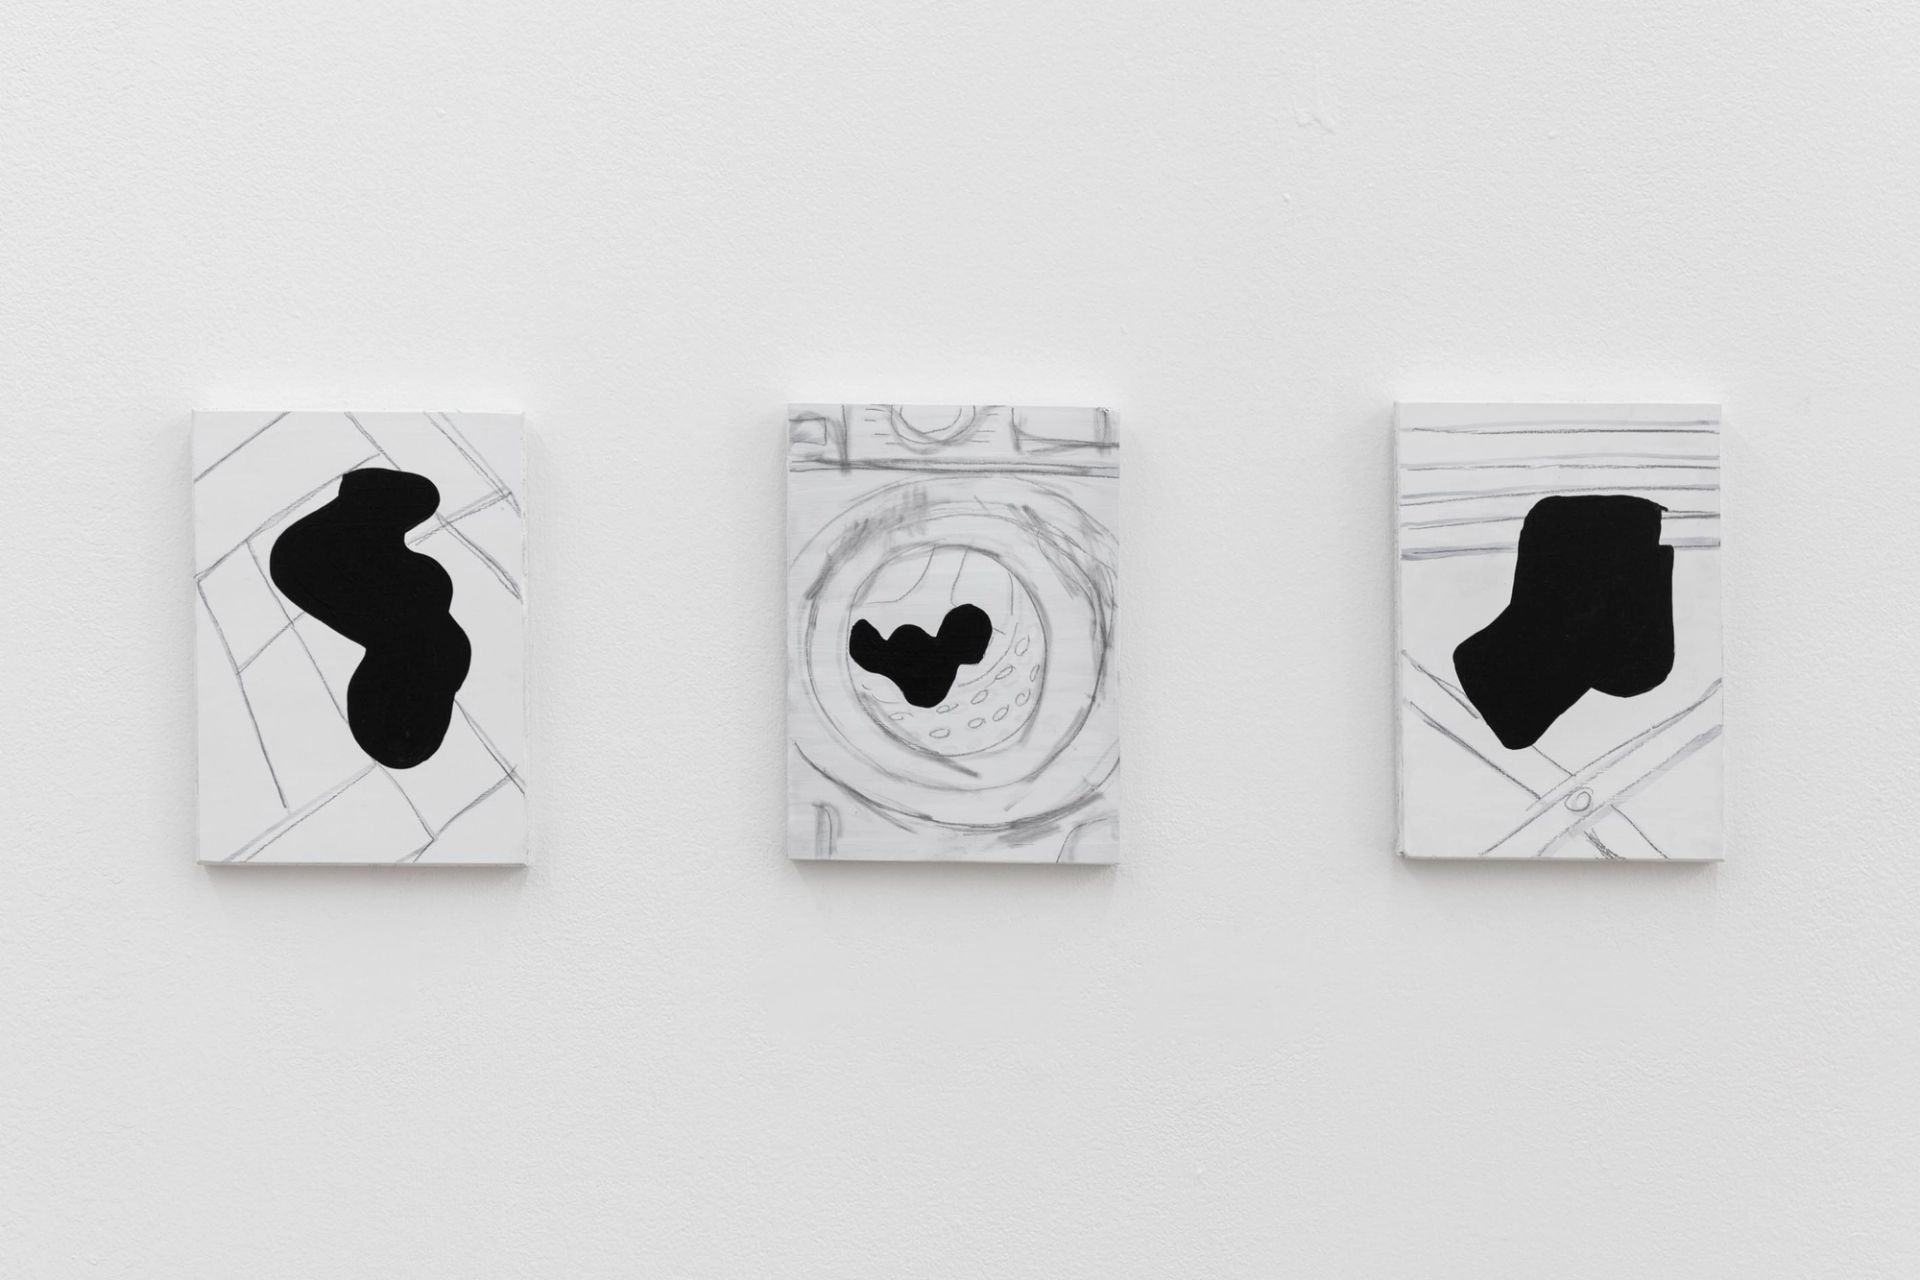 Anna McCarthy, “Washing Cycle (tryptych)”, 2022, permanent marker, pencil, acrylic on wood, each 21 × 15.4 × 2cm 